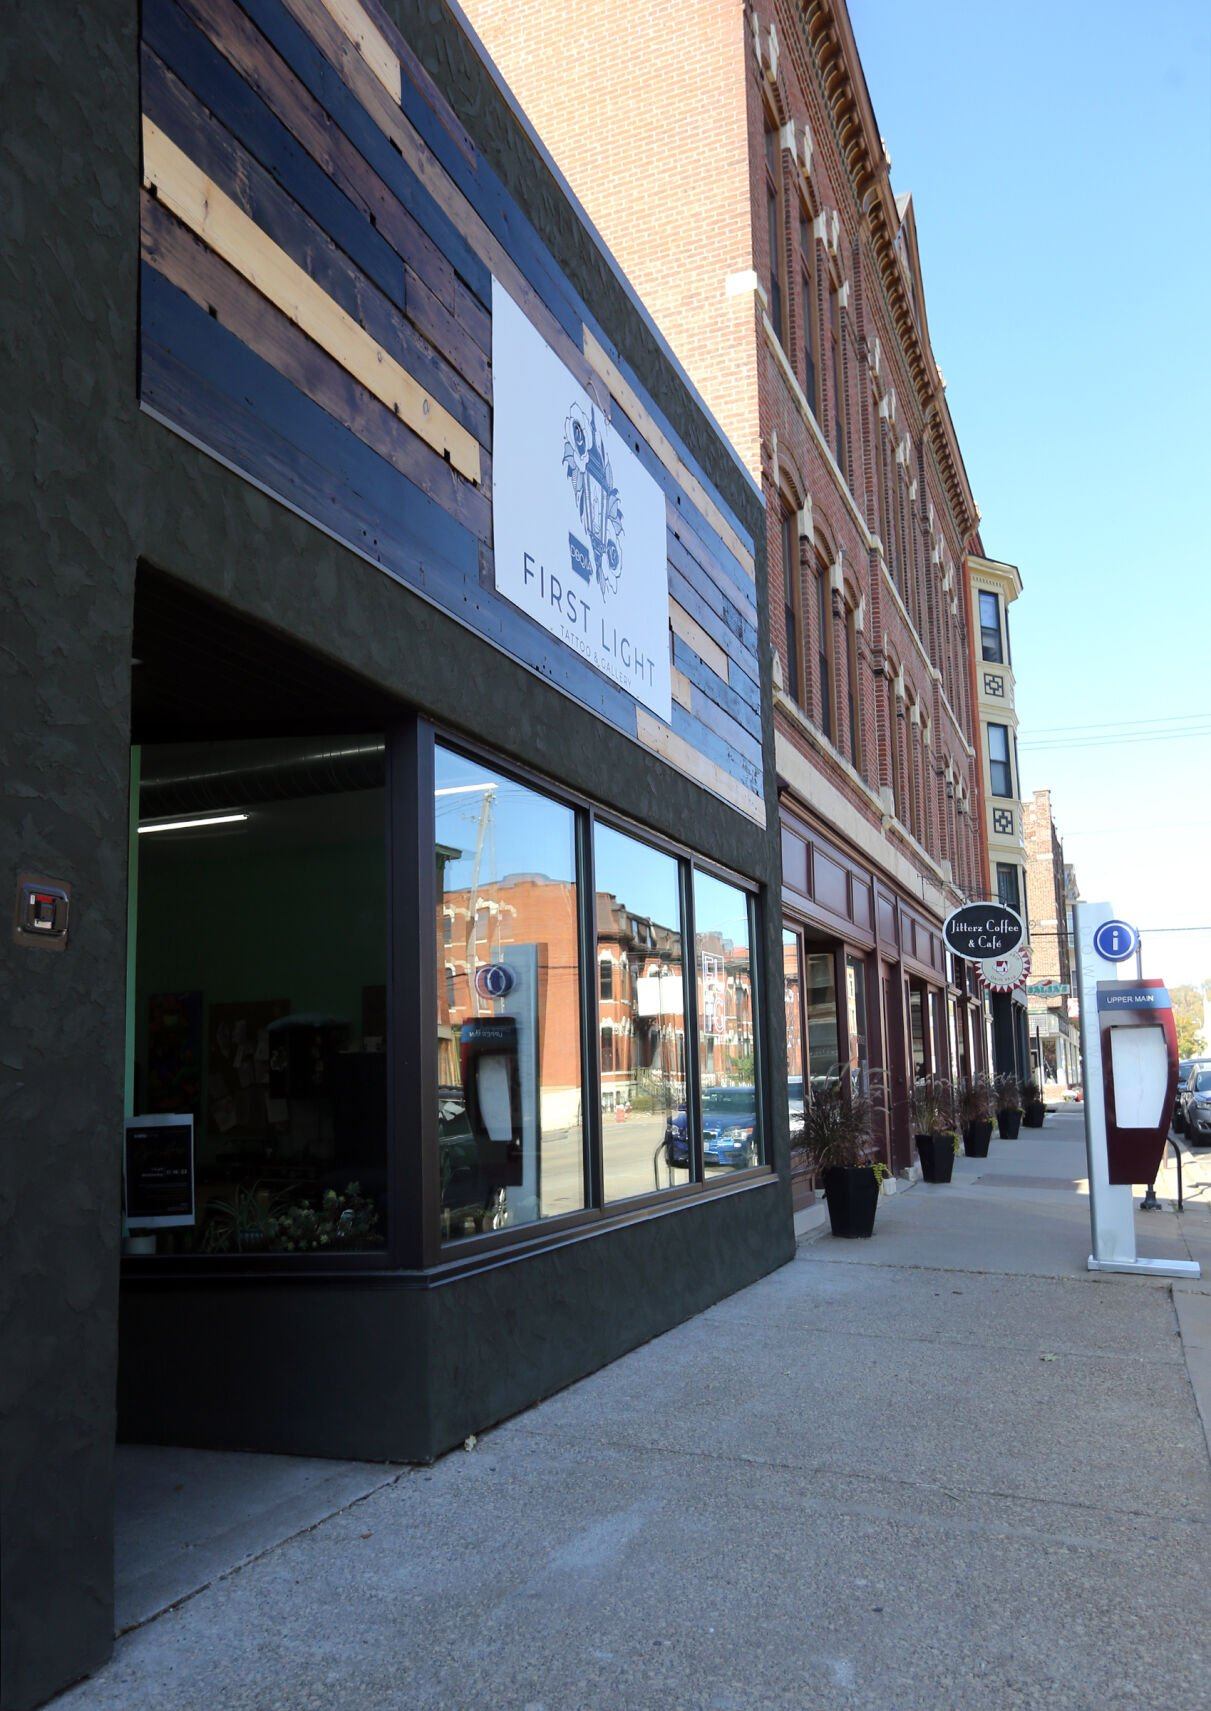 First Light Tattoo & Gallery in Dubuque on Friday, Oct. 21, 2022.    PHOTO CREDIT: JESSICA REILLY